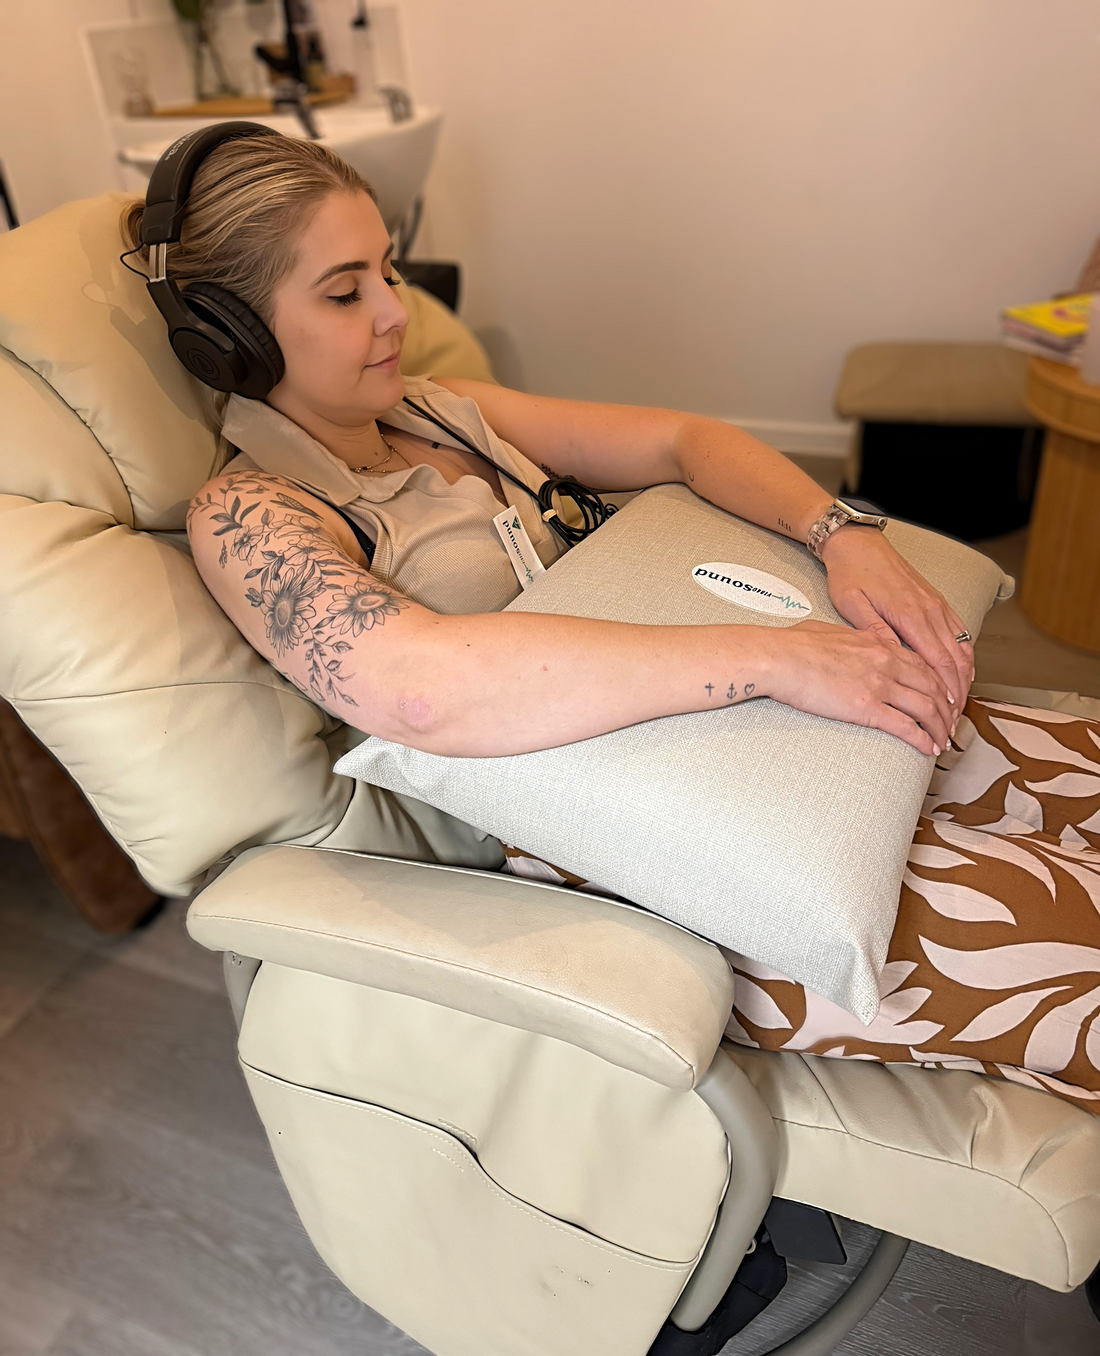 Experience the Healing Power of Sound with Our Vibro Sound Body Pillow